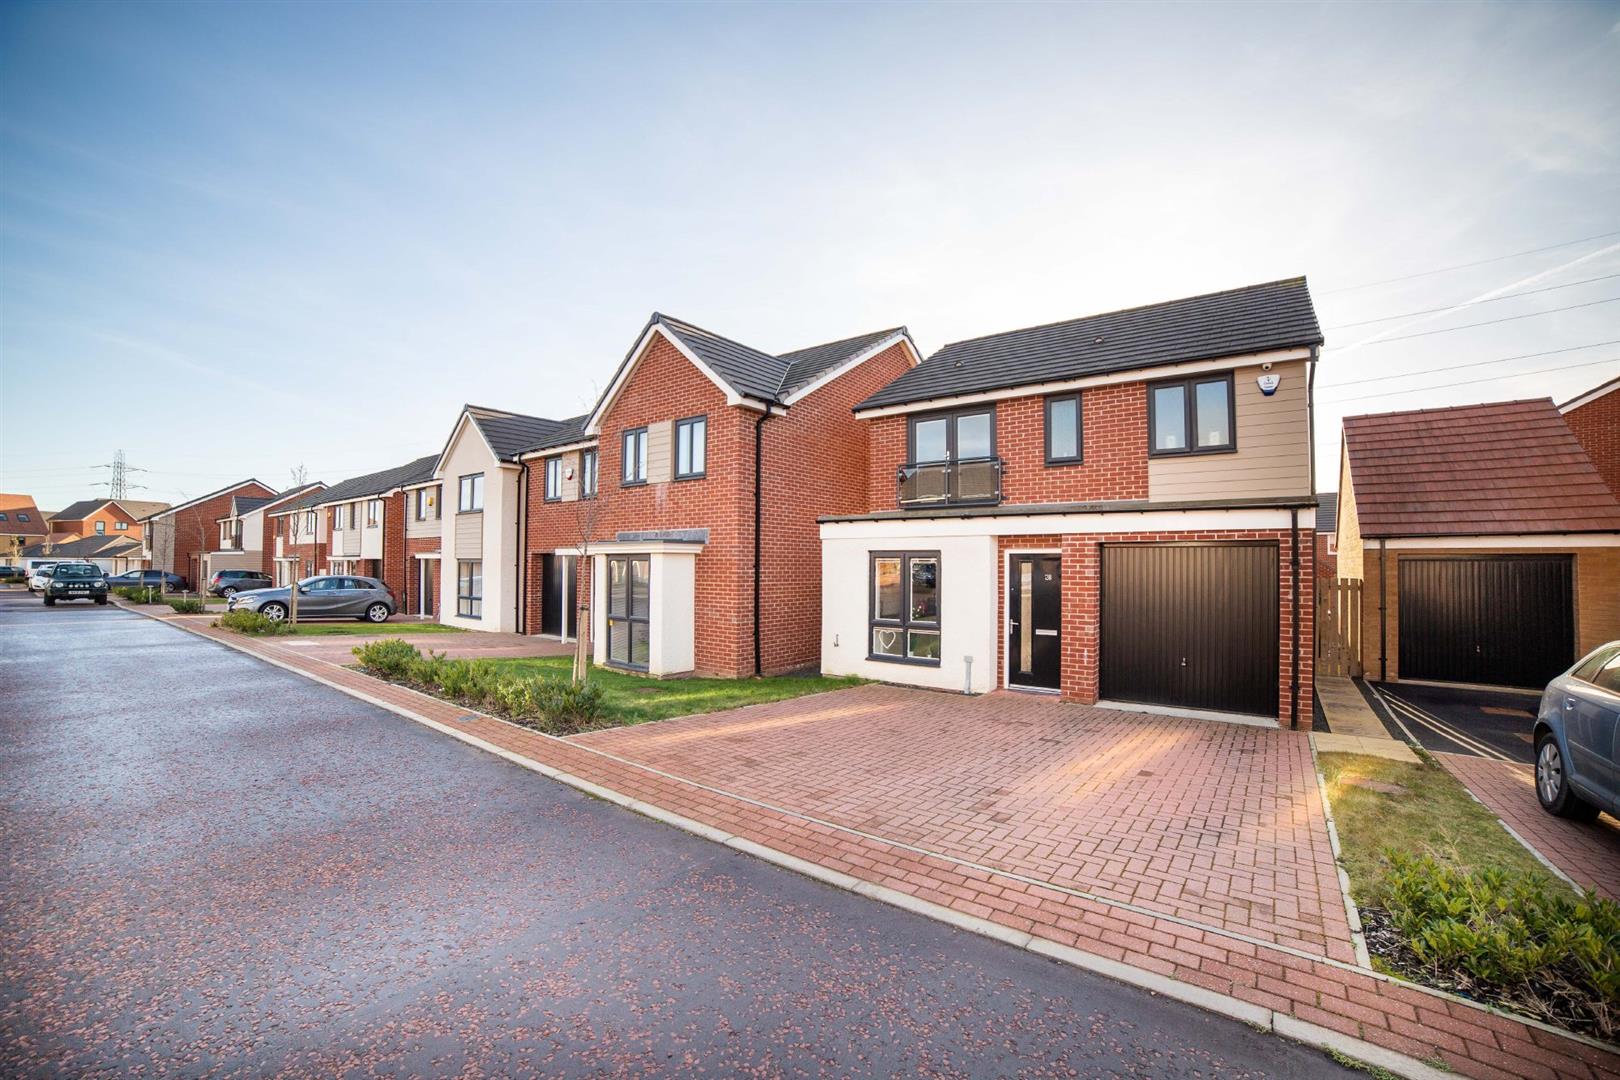 3 bed detached house for sale in Bridget Gardens, Great Park 0